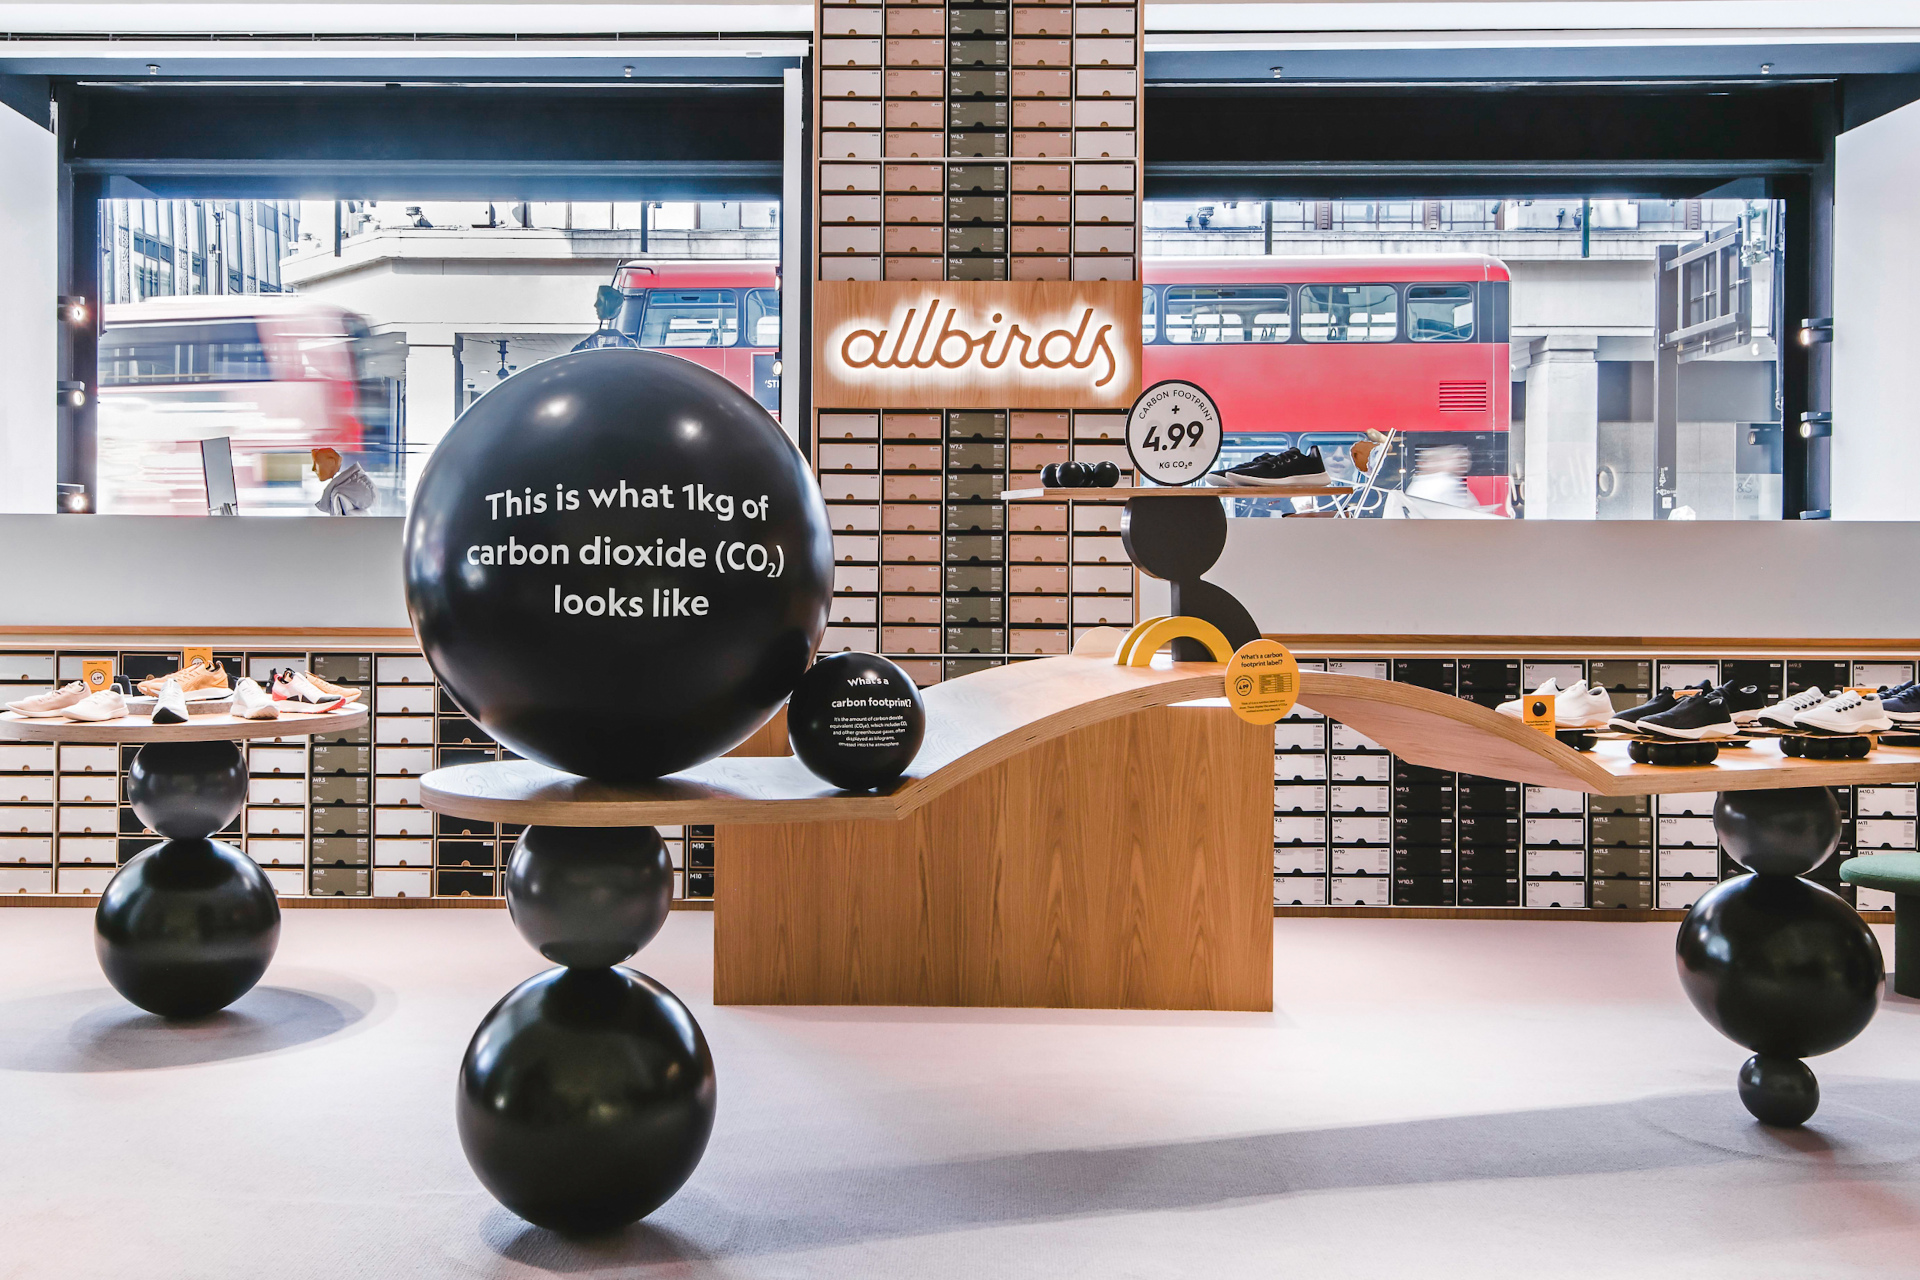 Shop layout with black ball sculptures and shoes